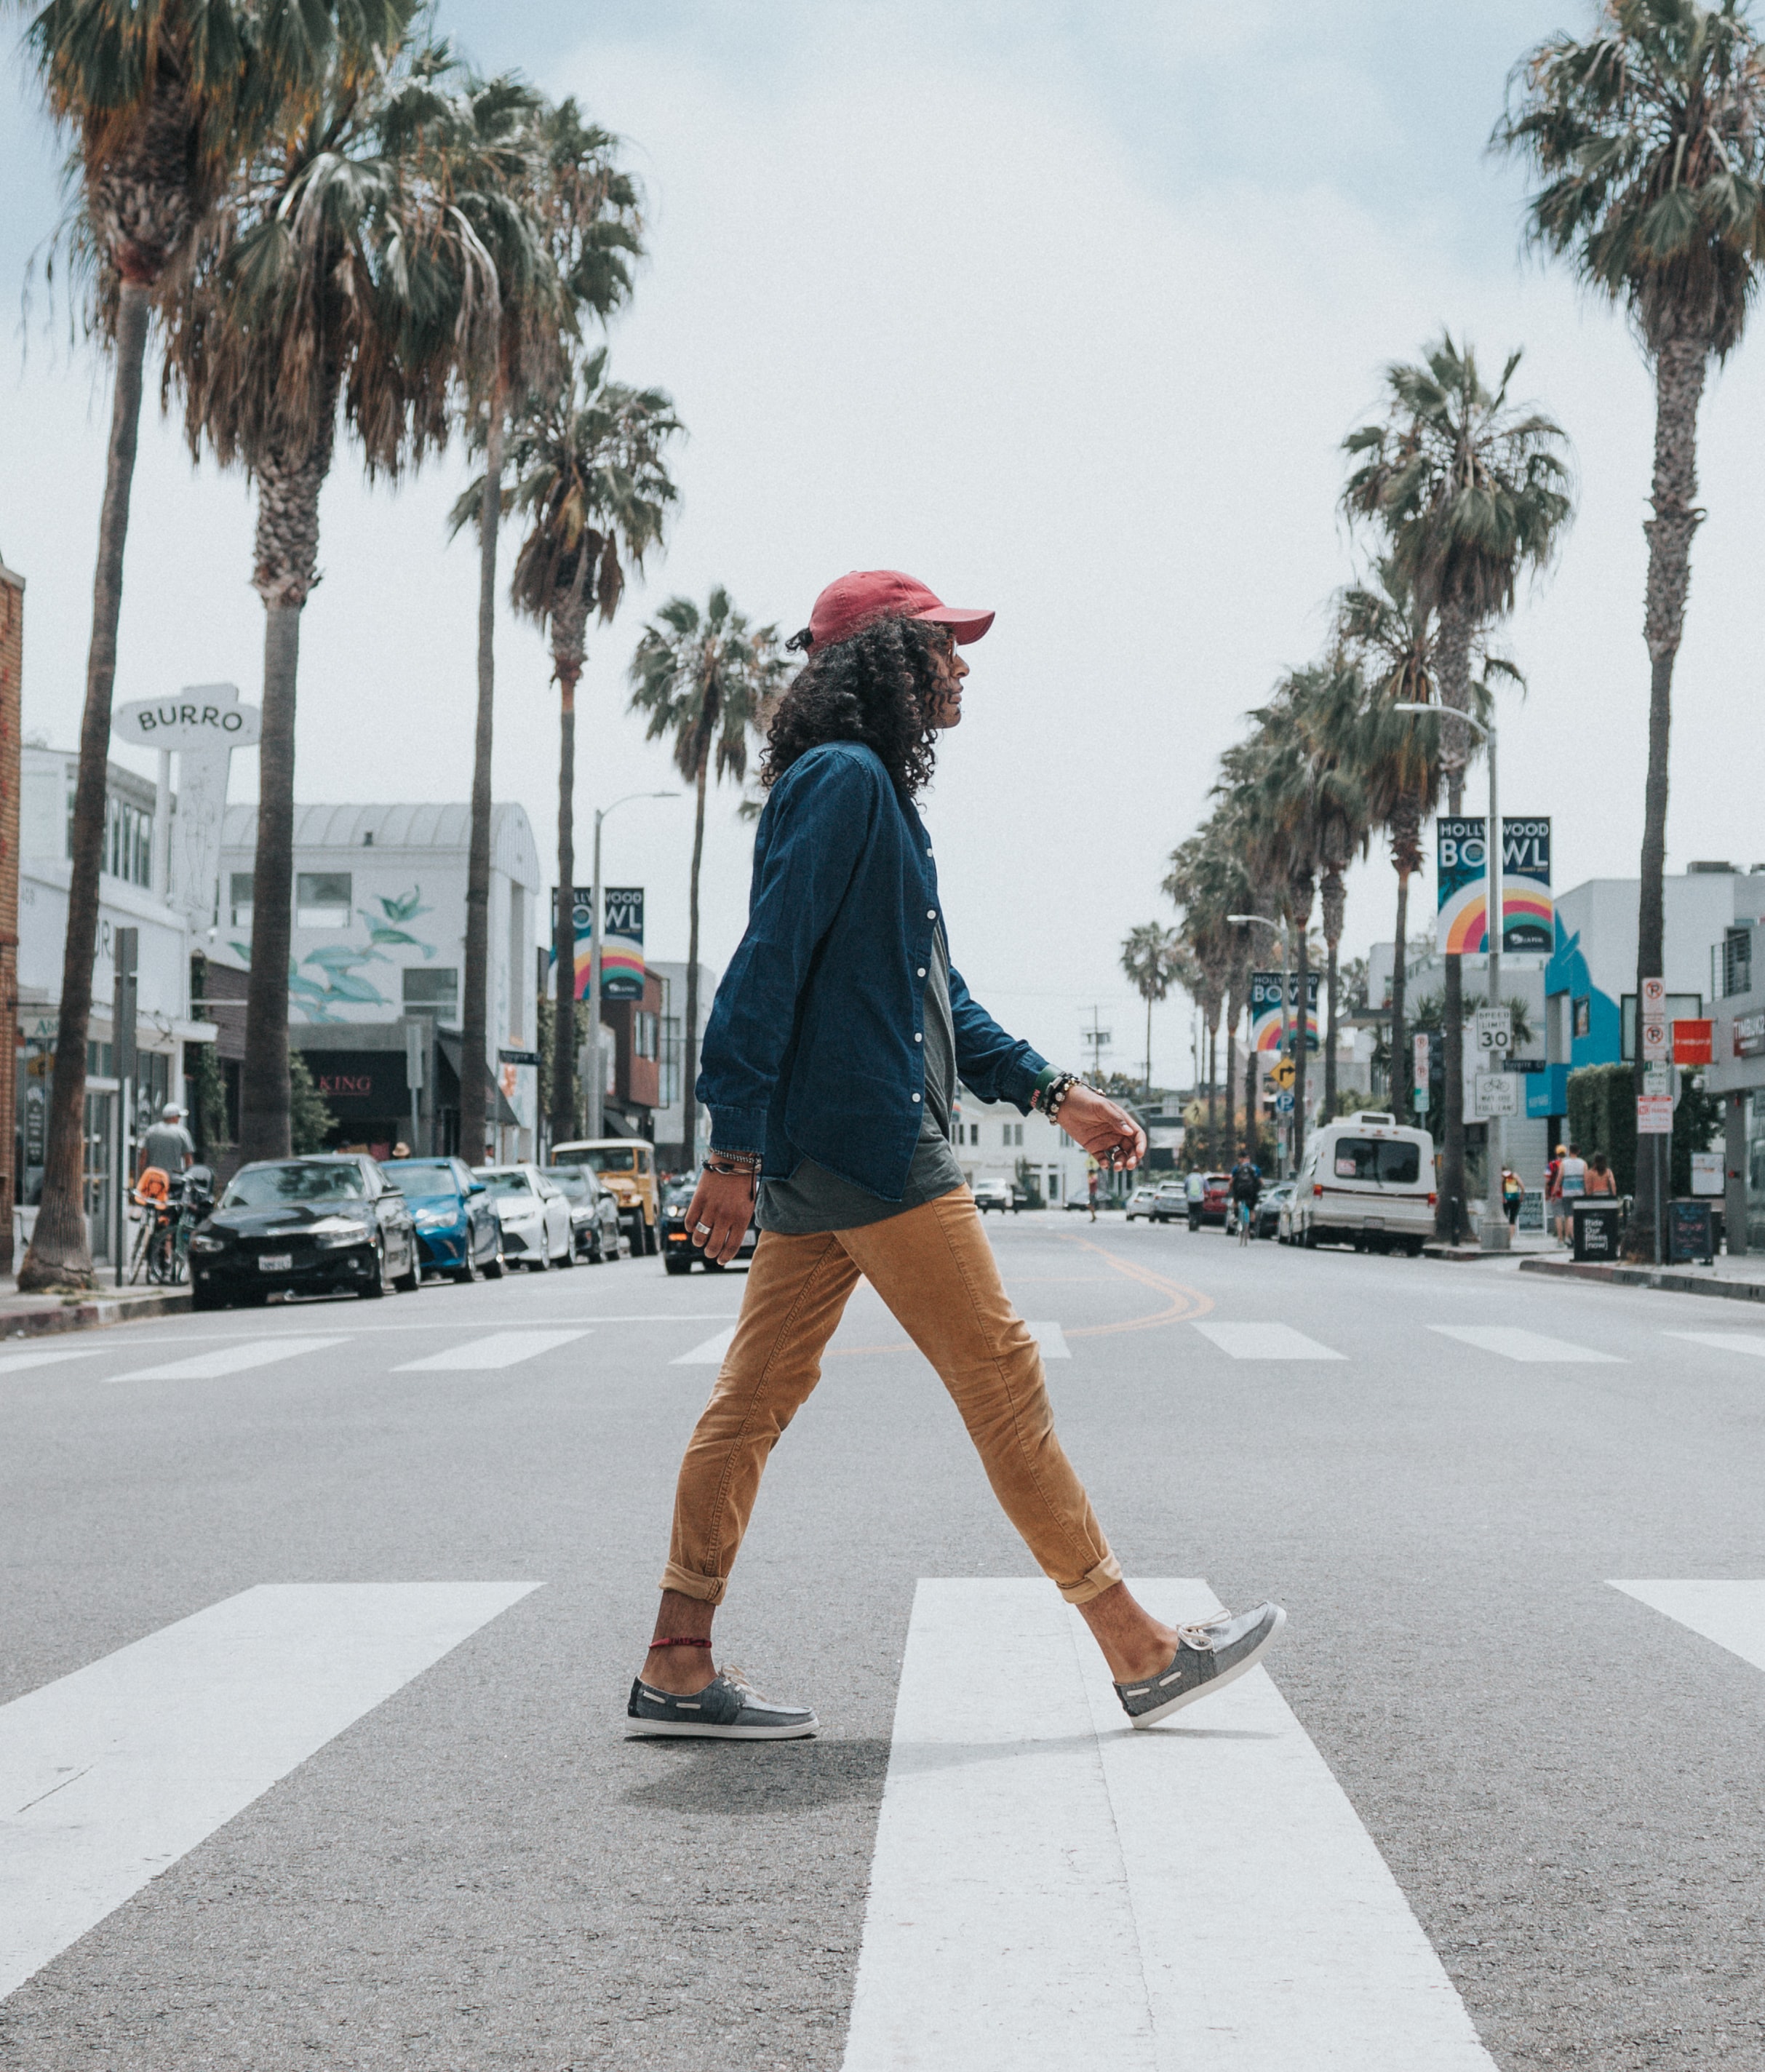 Man in a red hat walking in the crosswalk with palm trees in the background.